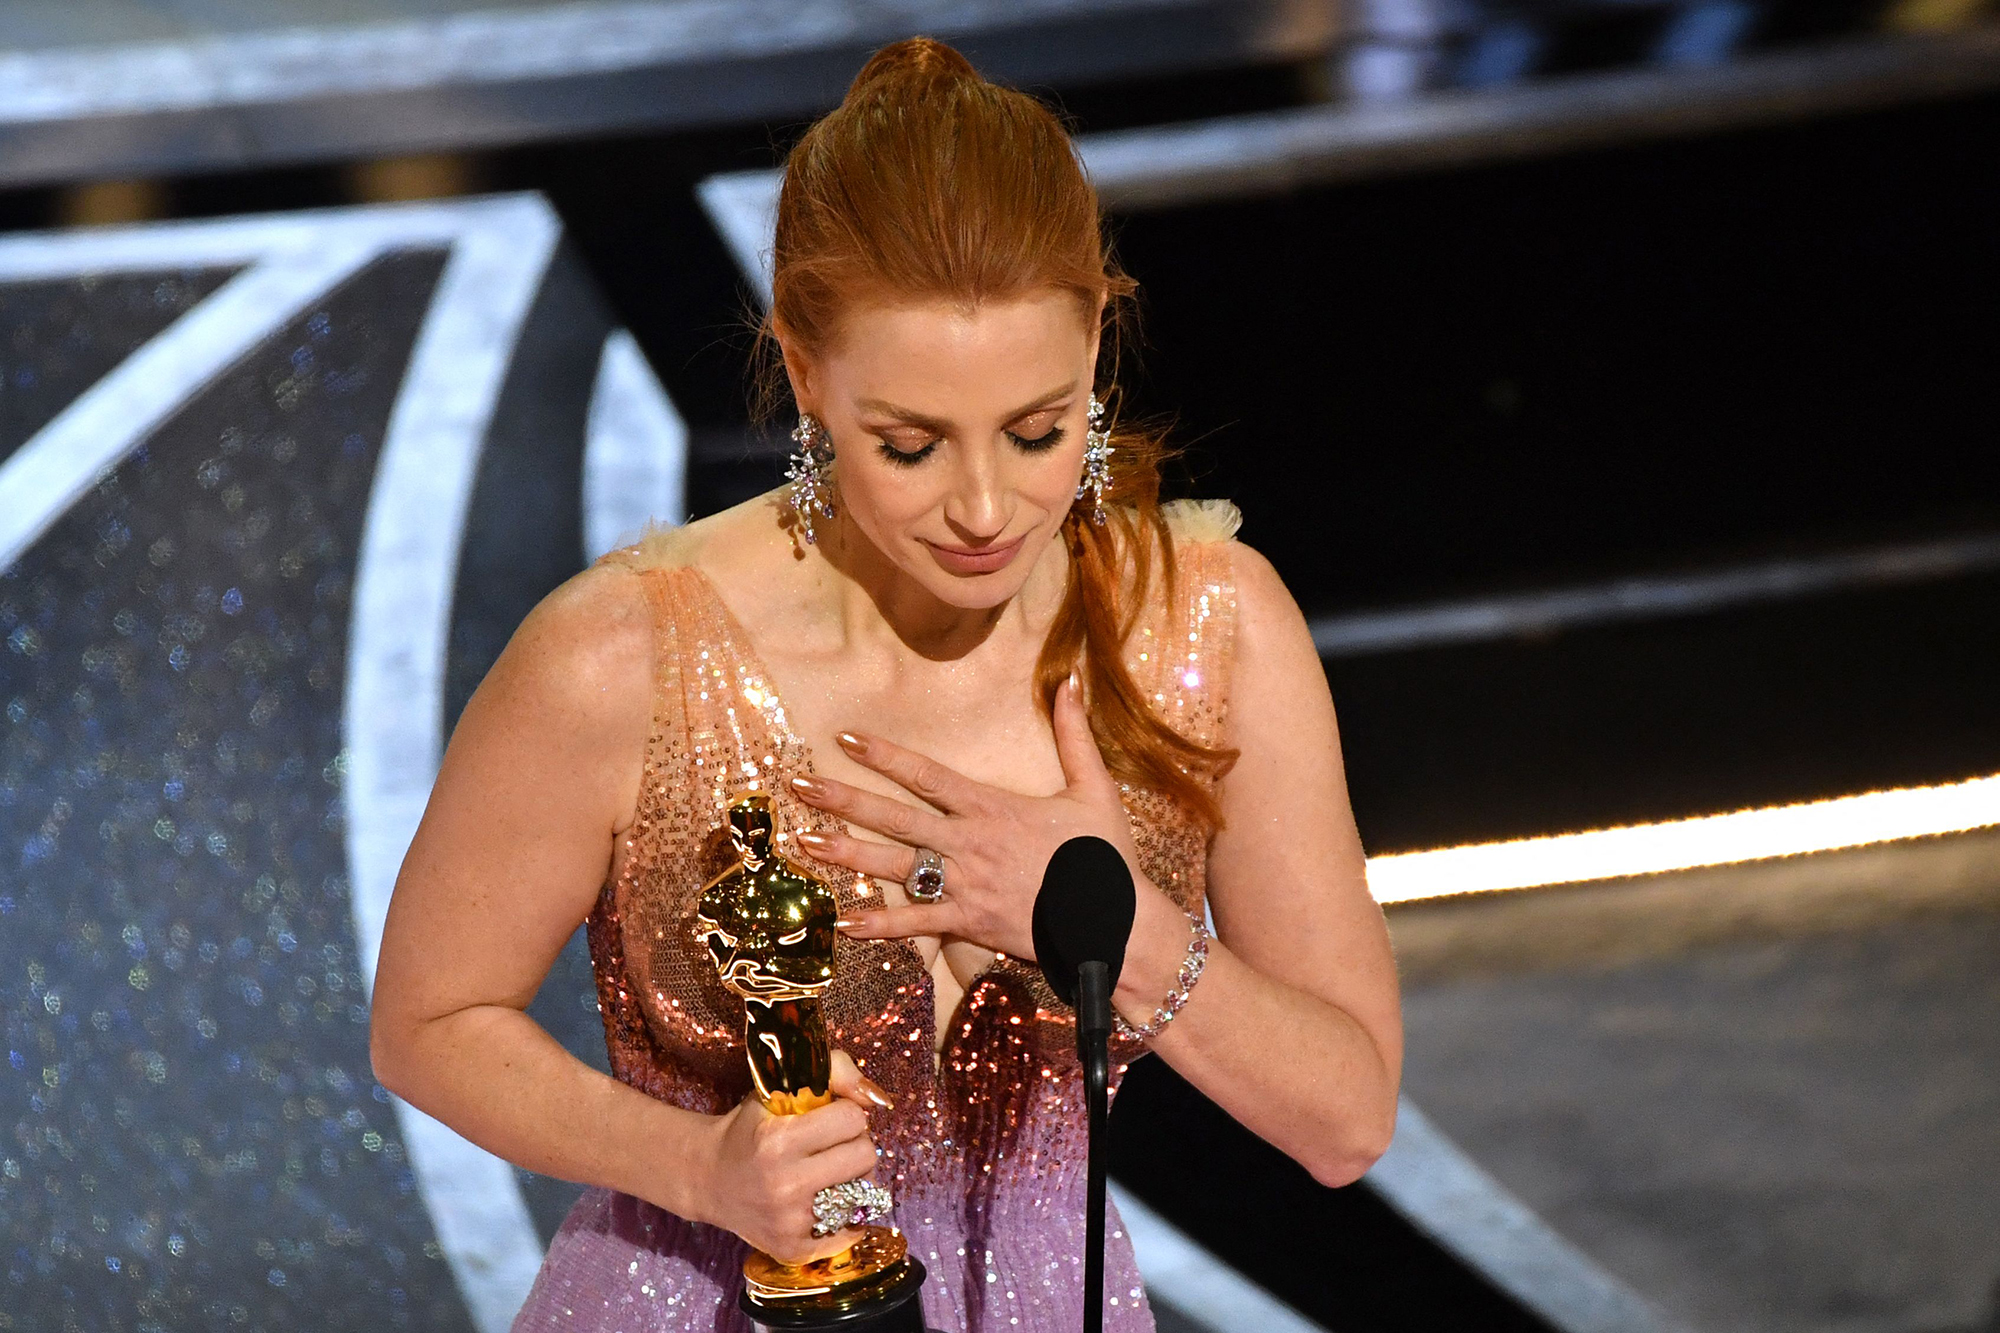 Jessica Chastain accepts the actress in a leading role award for “The Eyes of Tammy Faye.”